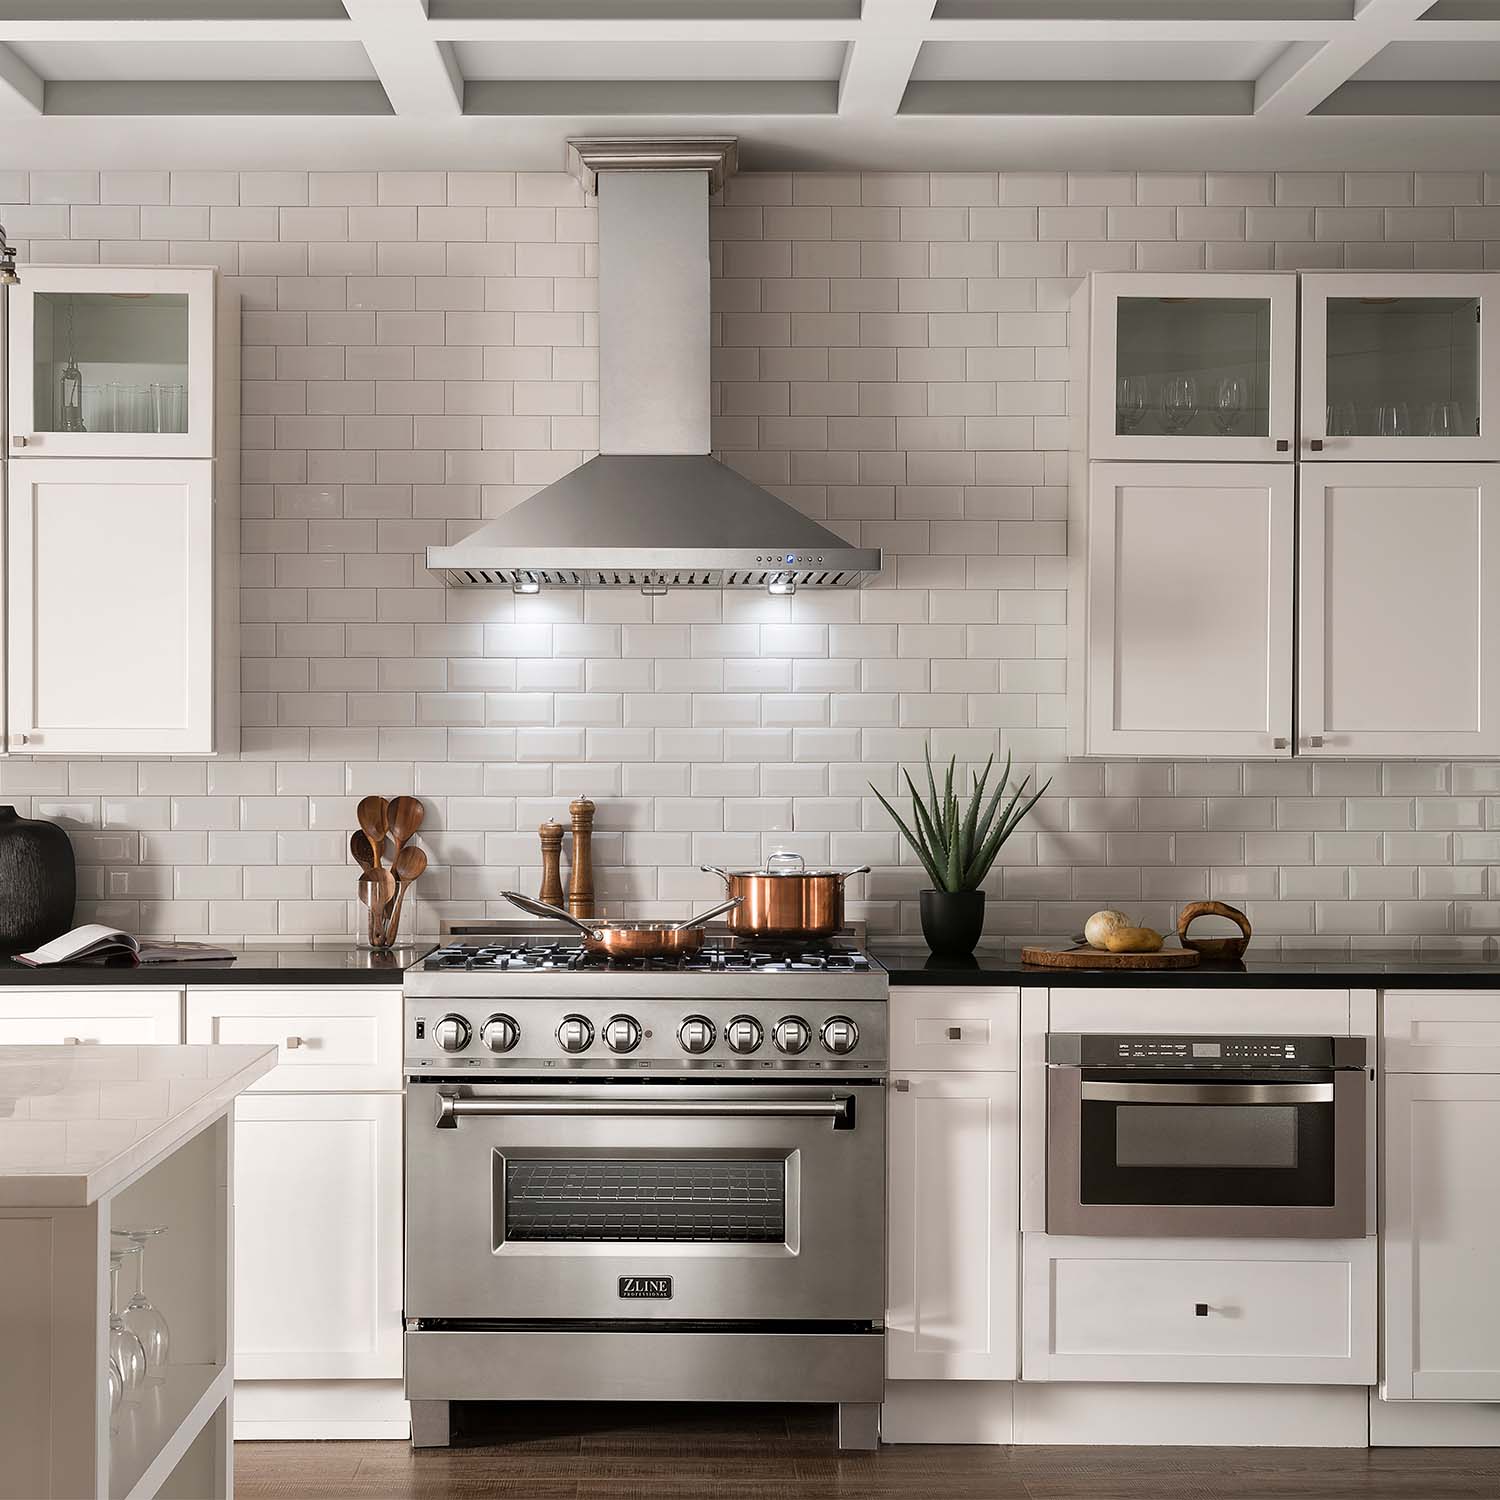 ZLINE appliance package with 36" range, 36" range hood, and microwave drawer in farmhouse-style kitchen.